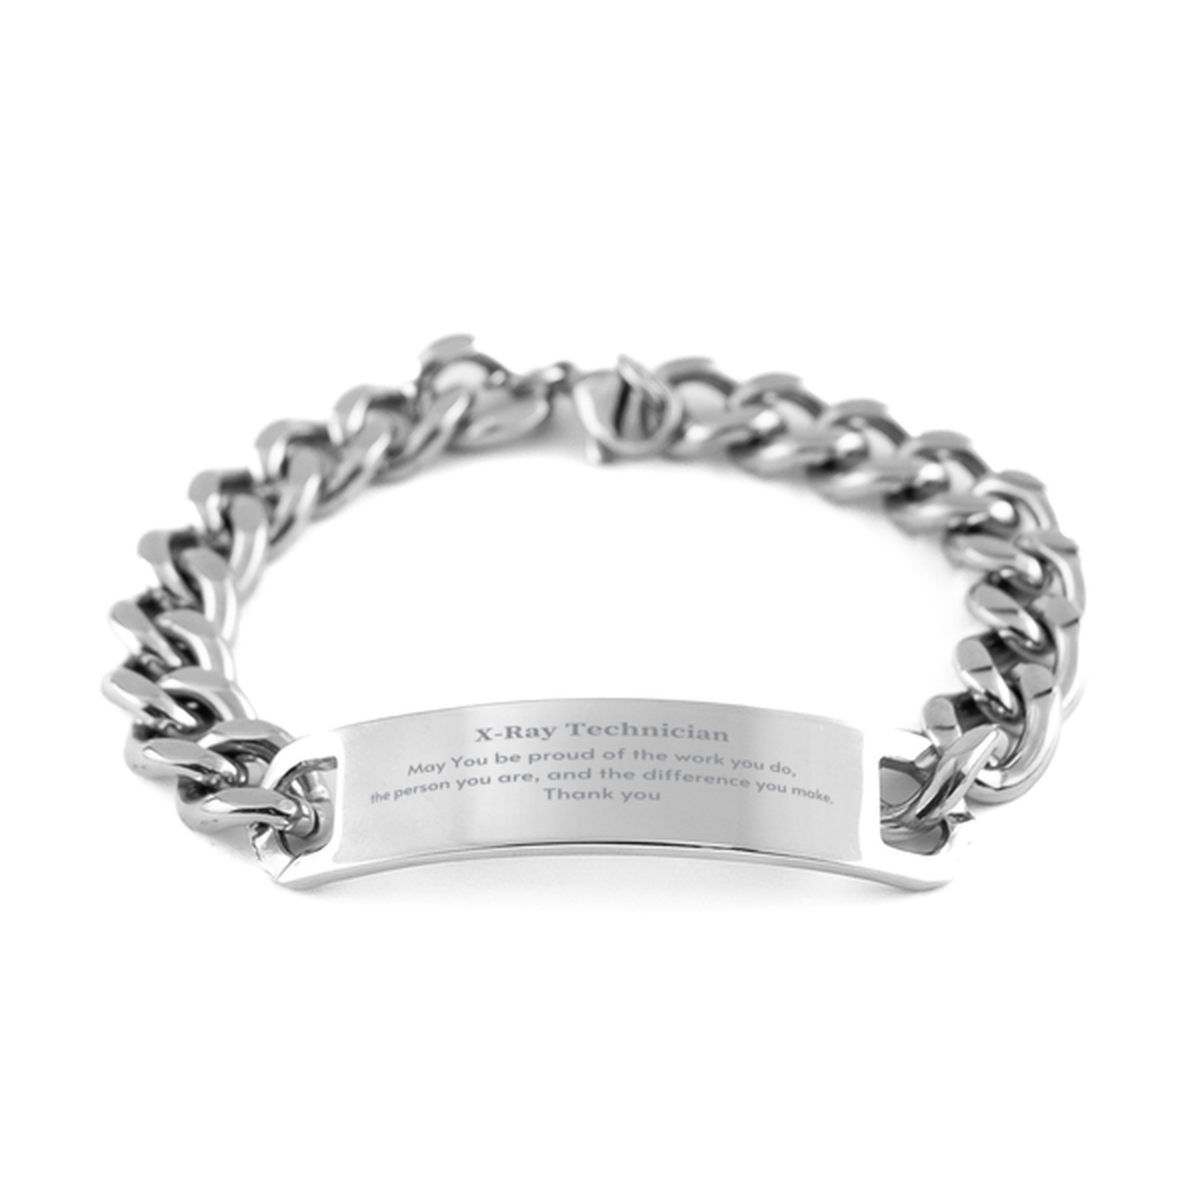 Heartwarming Cuban Chain Stainless Steel Bracelet Retirement Coworkers Gifts for X-Ray Technician, X-Ray Technician May You be proud of the work you do, the person you are Gifts for Boss Men Women Friends